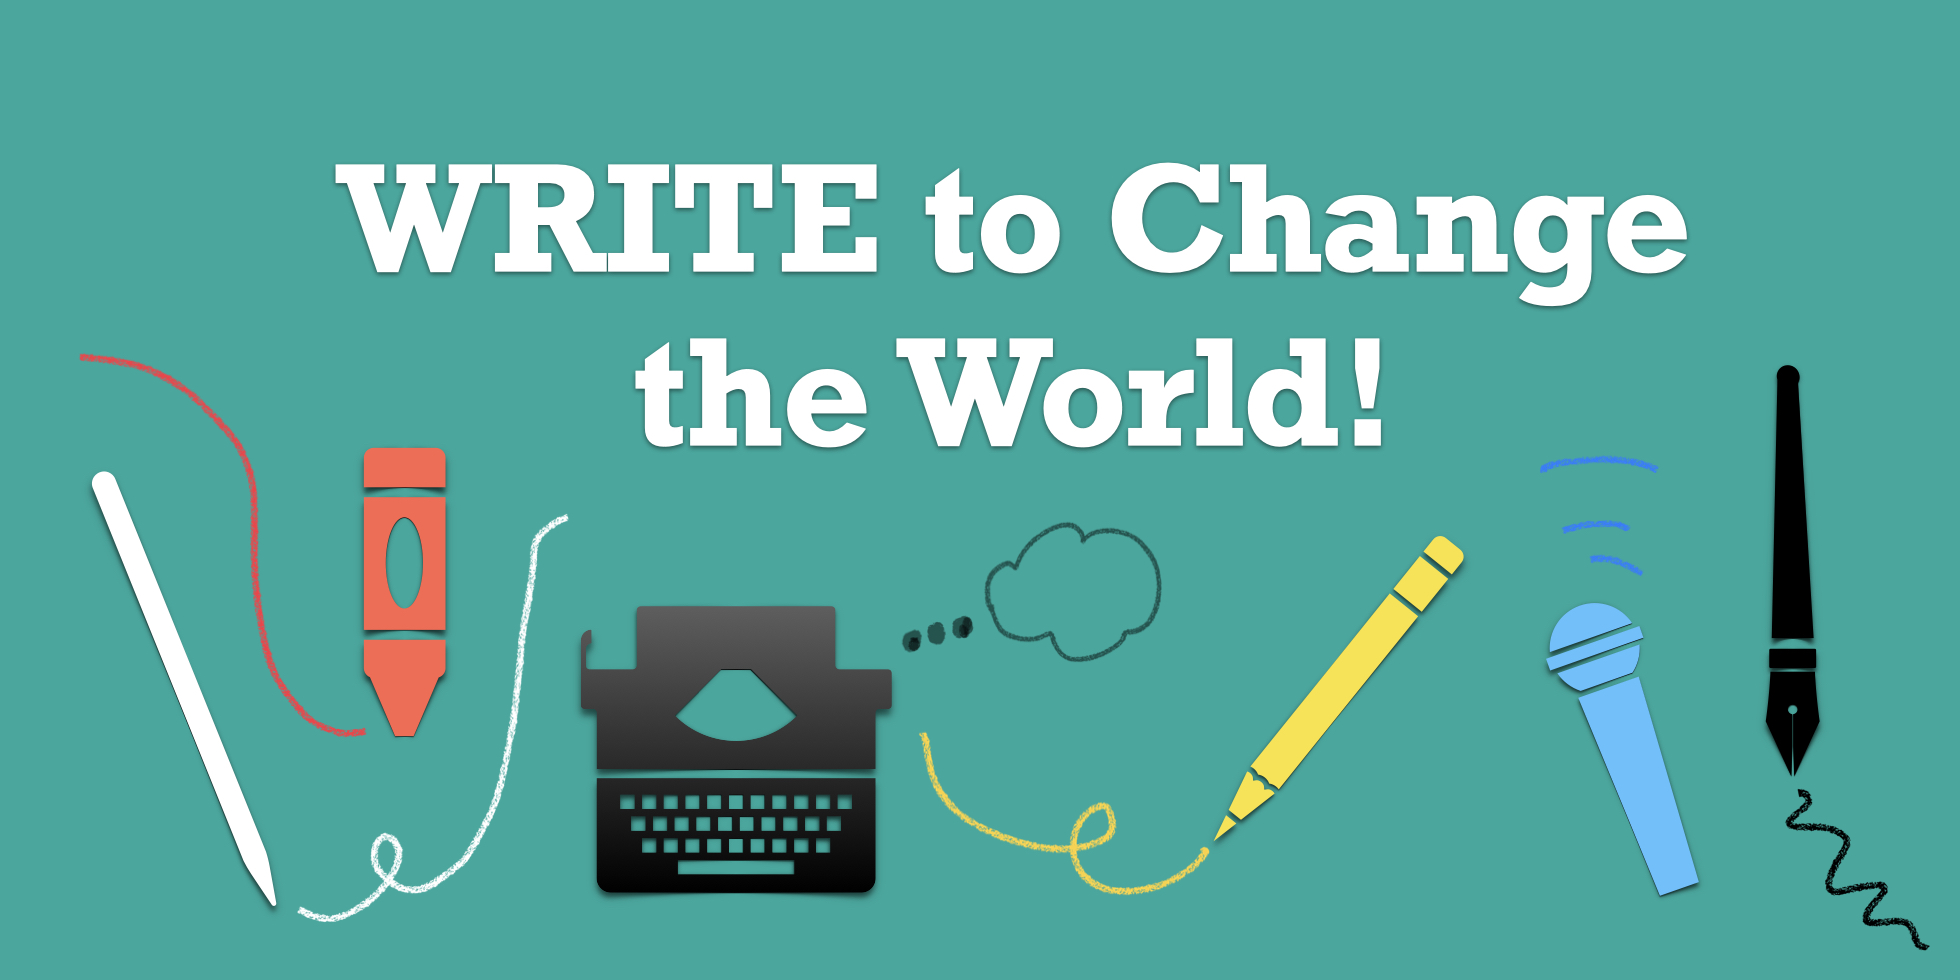 Text: "Write to Change the World" surrounding by images of writing tools.